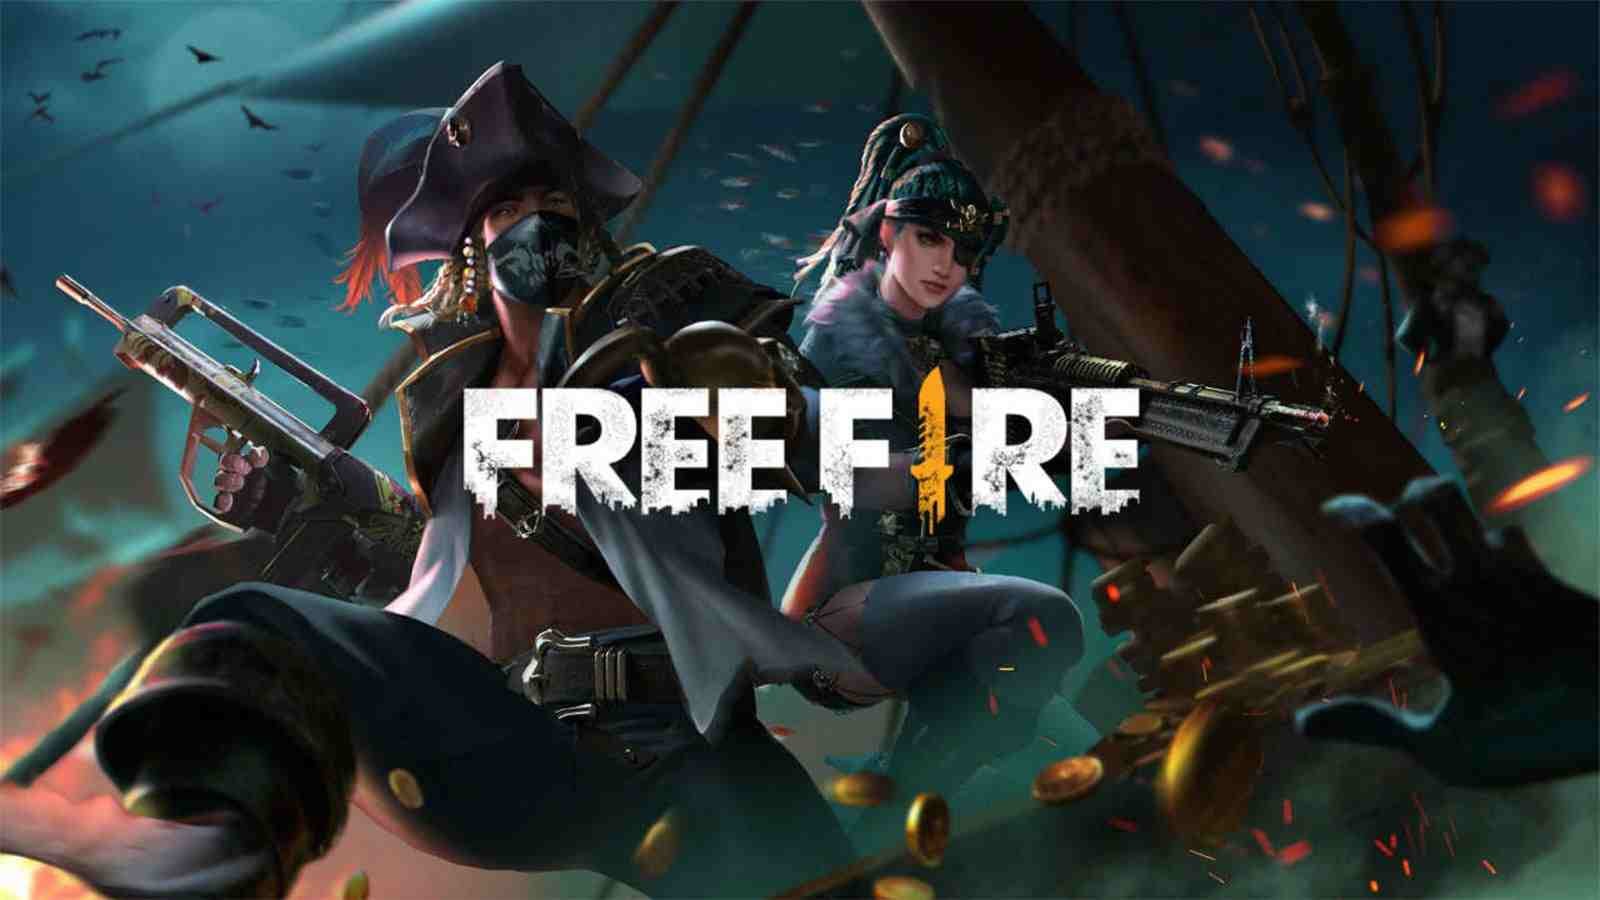 How To Use Vpn in Free Fire in 2022 (February 2022)